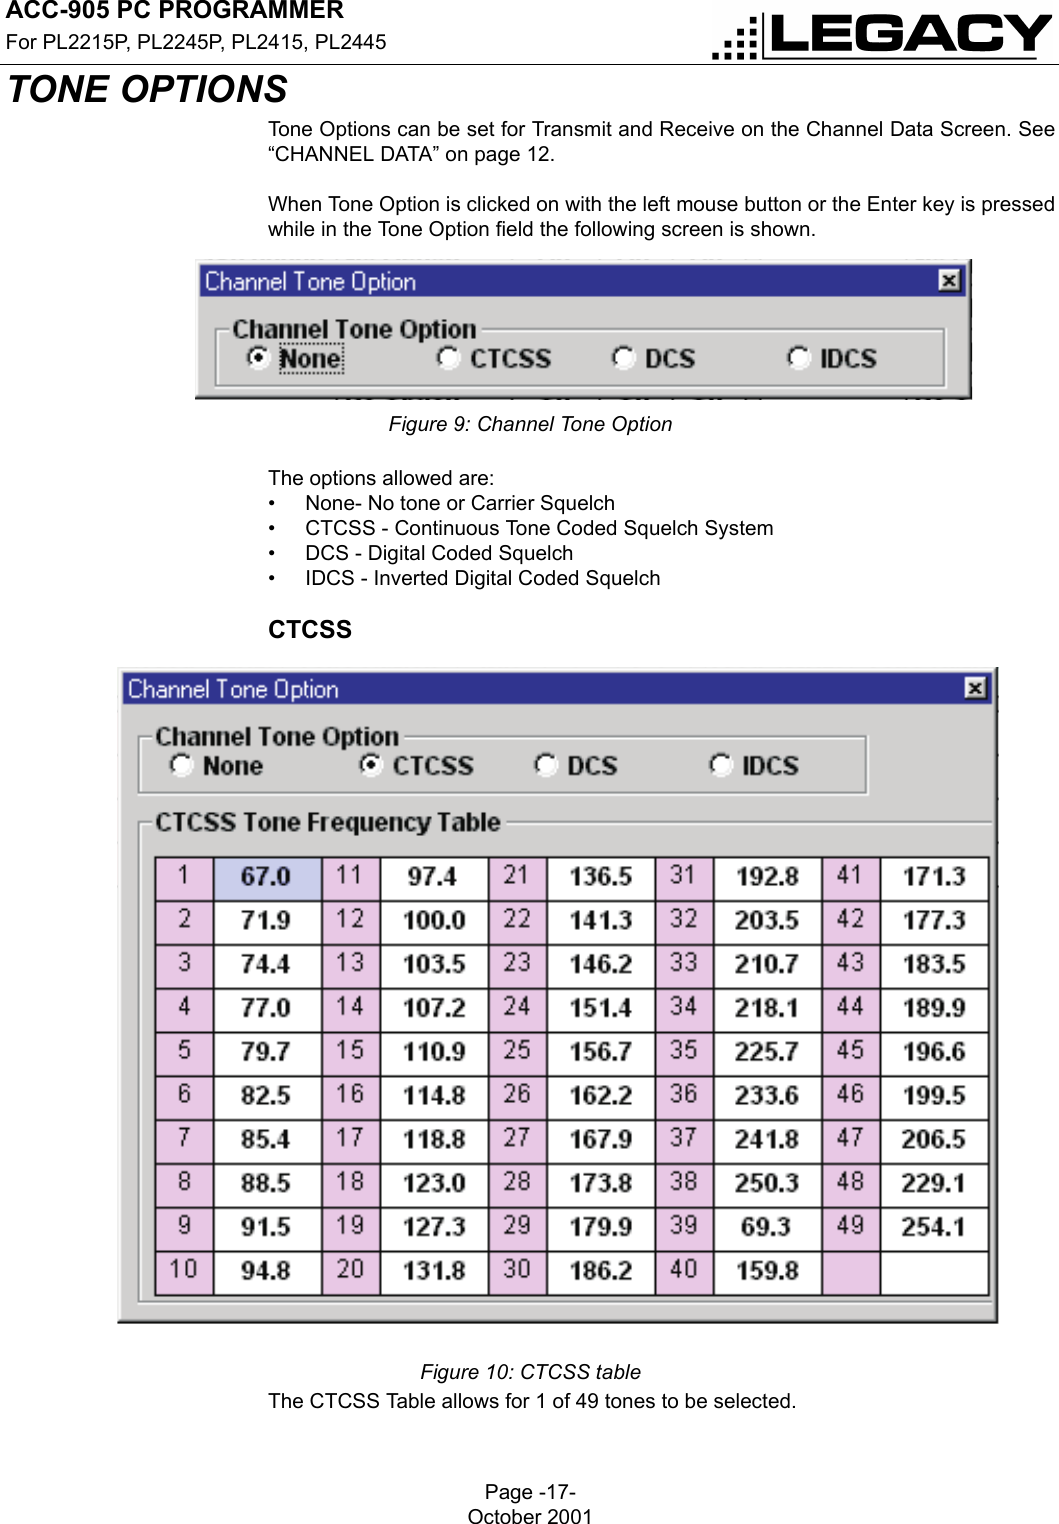 ACC-905 PC PROGRAMMERFor PL2215P, PL2245P, PL2415, PL2445Page -17-October 2001TONE OPTIONSTONE OPTIONSTone Options can be set for Transmit and Receive on the Channel Data Screen. See“CHANNEL DATA” on page 12.When Tone Option is clicked on with the left mouse button or the Enter key is pressedwhile in the Tone Option field the following screen is shown.Figure 9: Channel Tone OptionThe options allowed are:• None- No tone or Carrier Squelch• CTCSS - Continuous Tone Coded Squelch System• DCS - Digital Coded Squelch• IDCS - Inverted Digital Coded SquelchCTCSSFigure 10: CTCSS tableThe CTCSS Table allows for 1 of 49 tones to be selected.